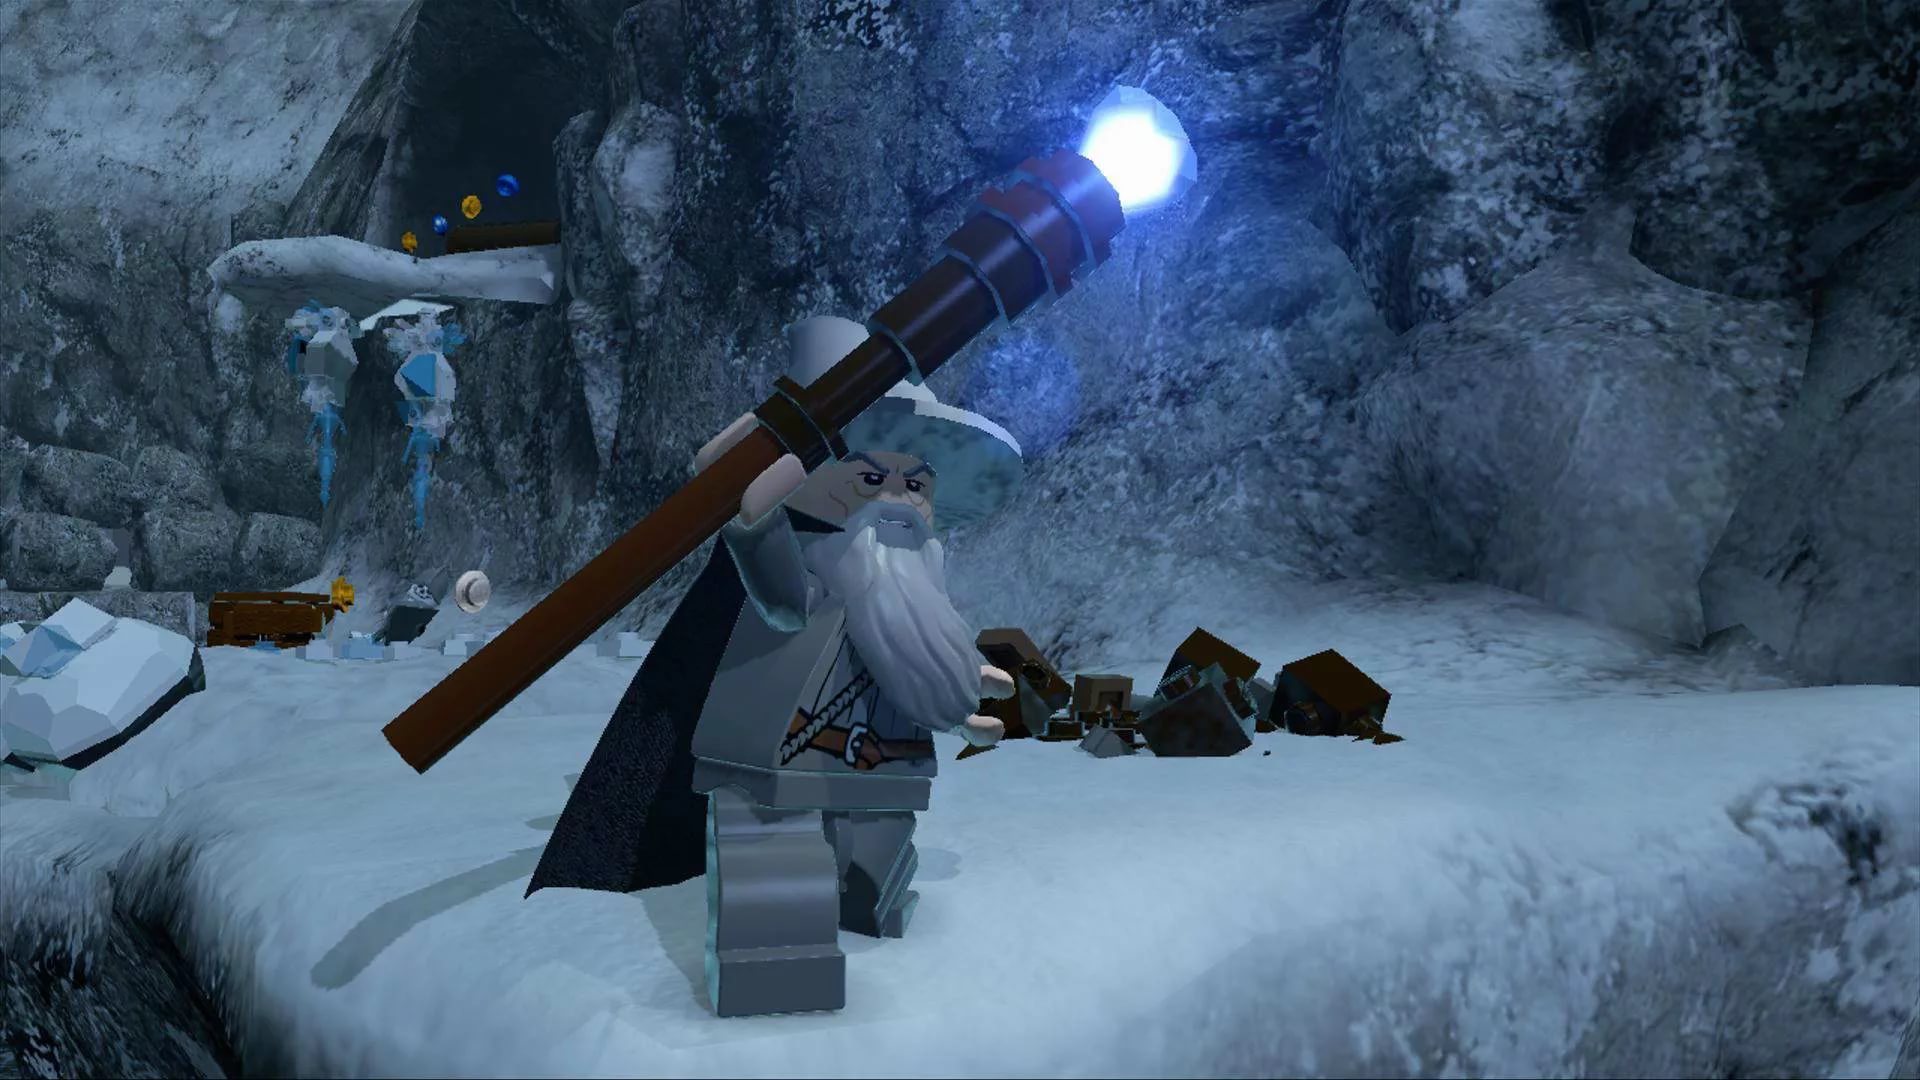 LEGO The Lord of the Rings (Steam/Region Free)